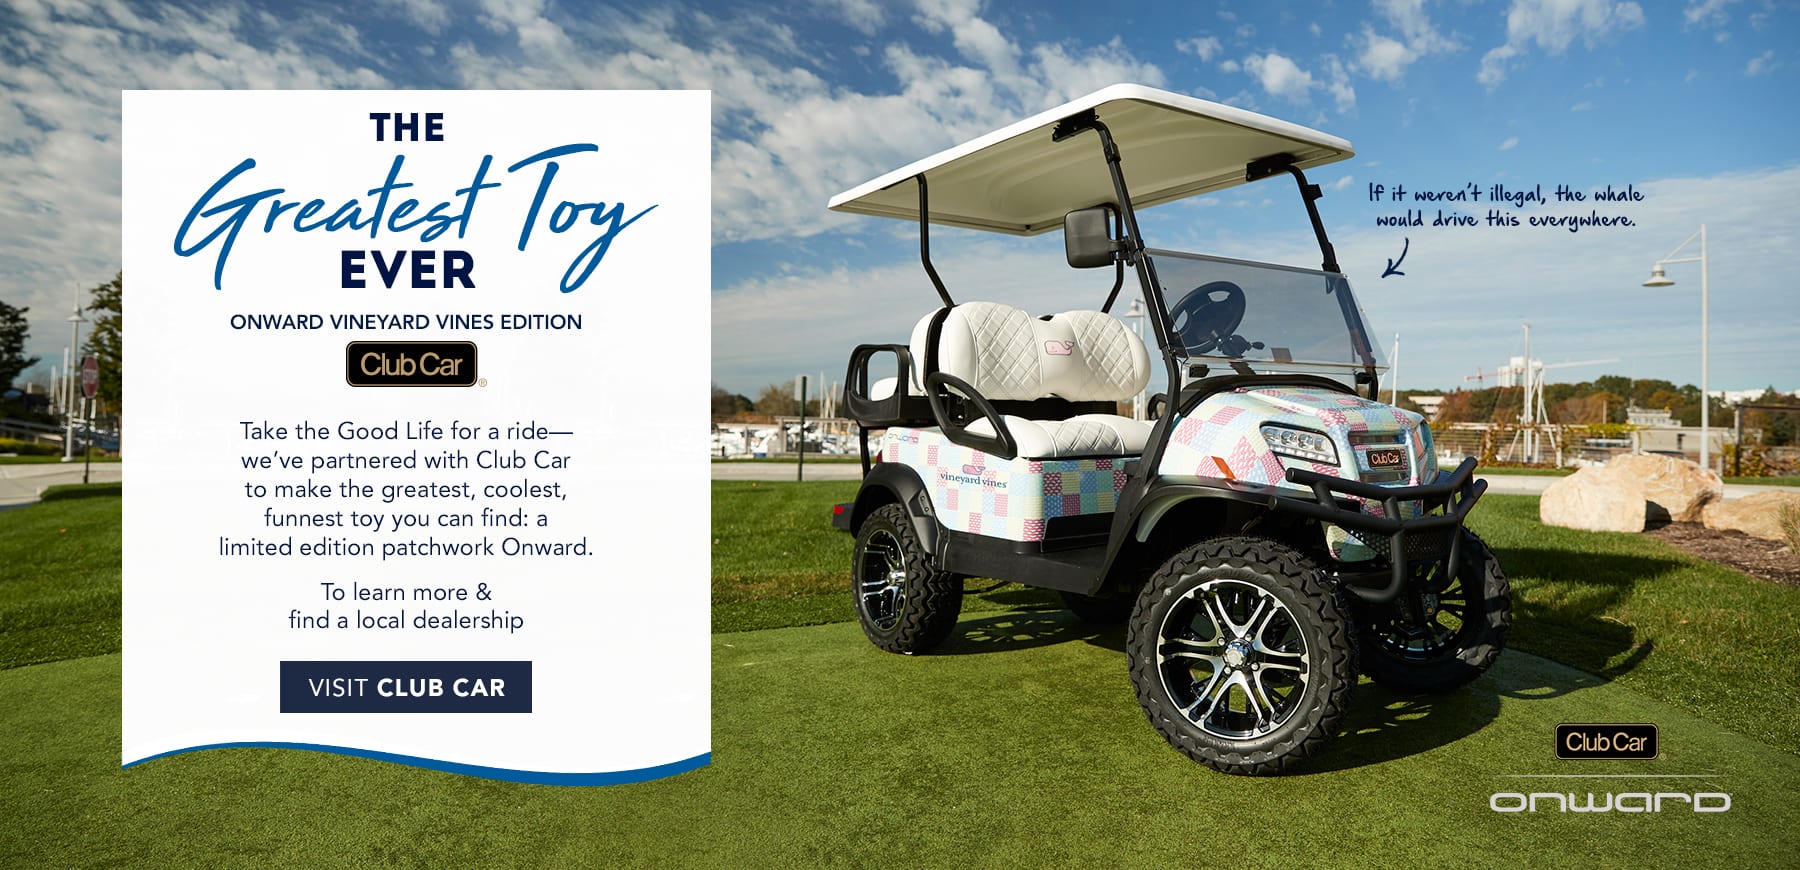 The Greatest Toy Ever. Onward vineyard vines edition. Club Car. Take the Good Life for a ride - we've partnered with Club Car to make this year's greatest gift: a limited edition patchwork Onward. To learn more & final a local dealership visit Club Car by clicking here.